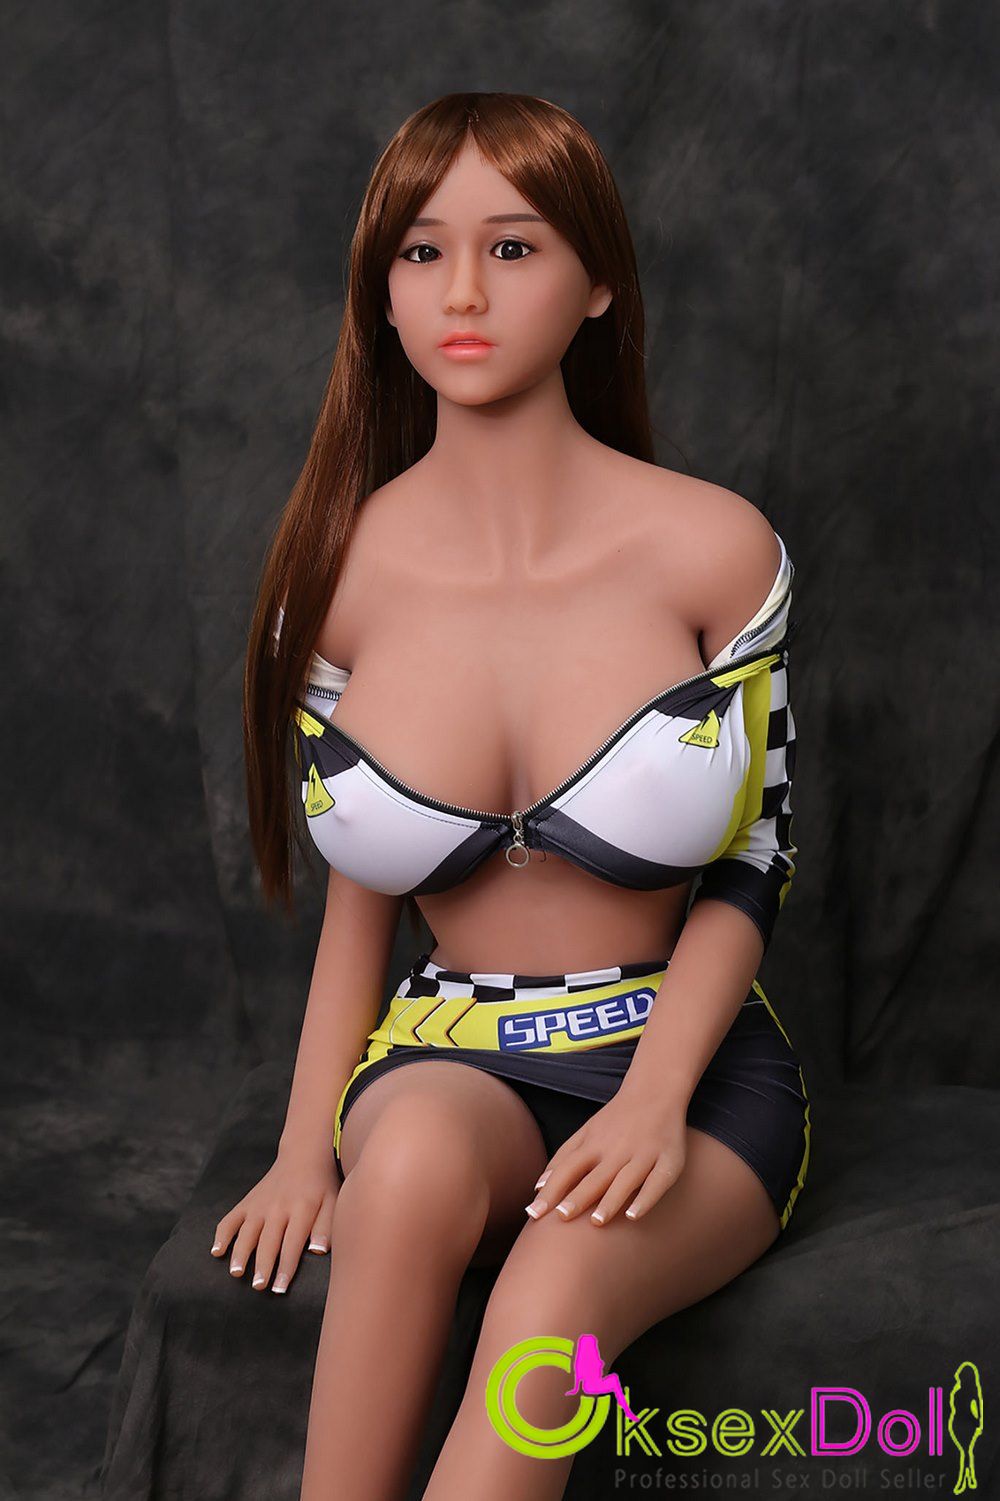 Busty Girl Sex Doll pic